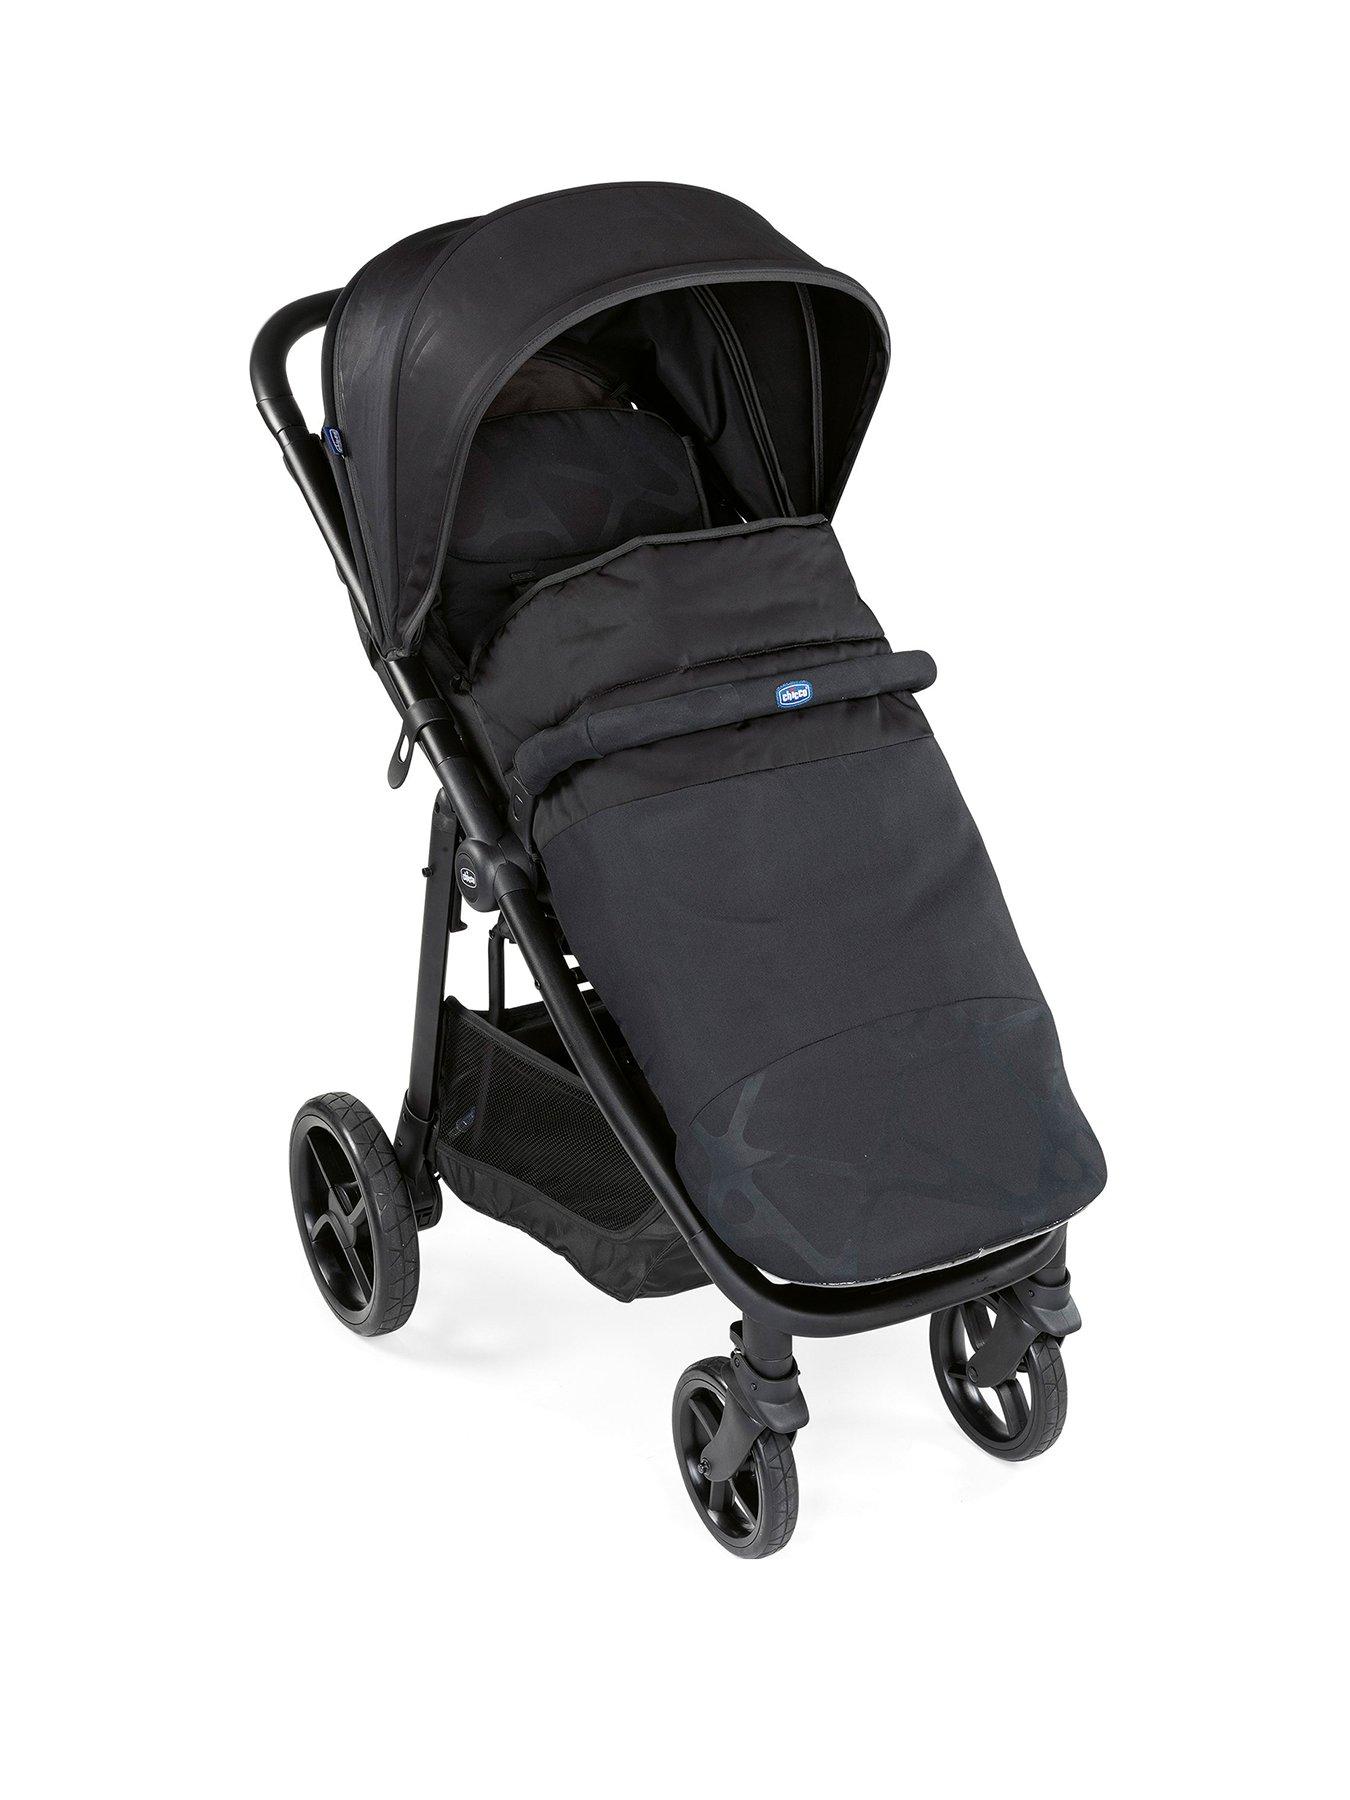 travel system with adjustable handle height